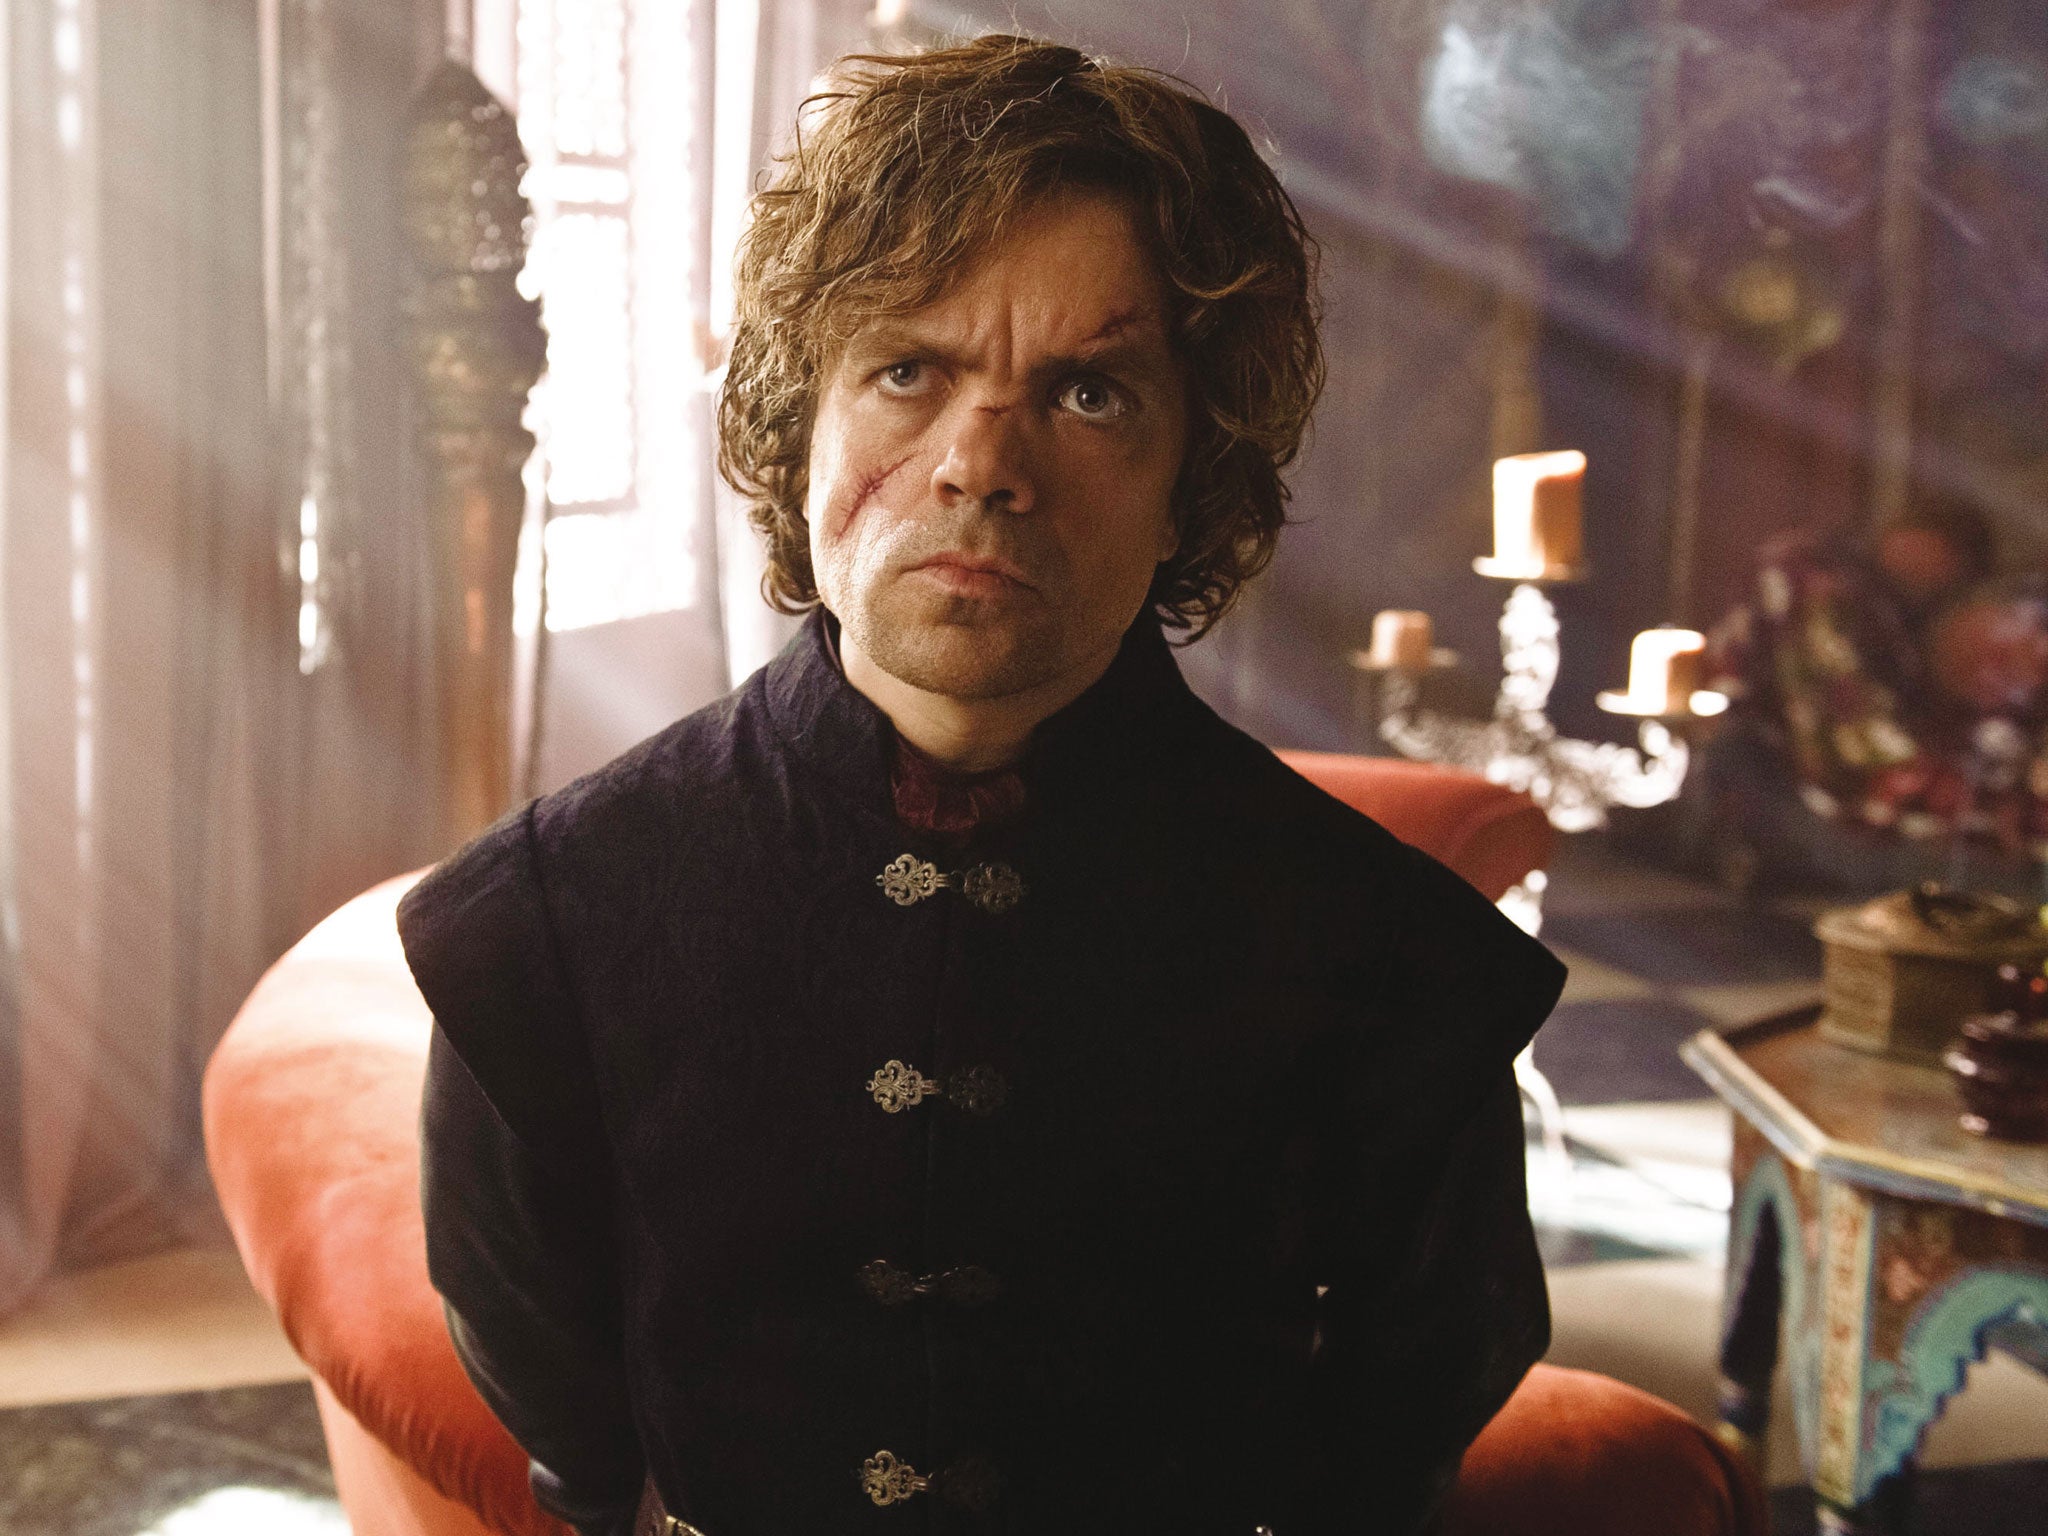 P to the IMP: Peter Dinklage as Tyrion Lannister in Game of Thrones